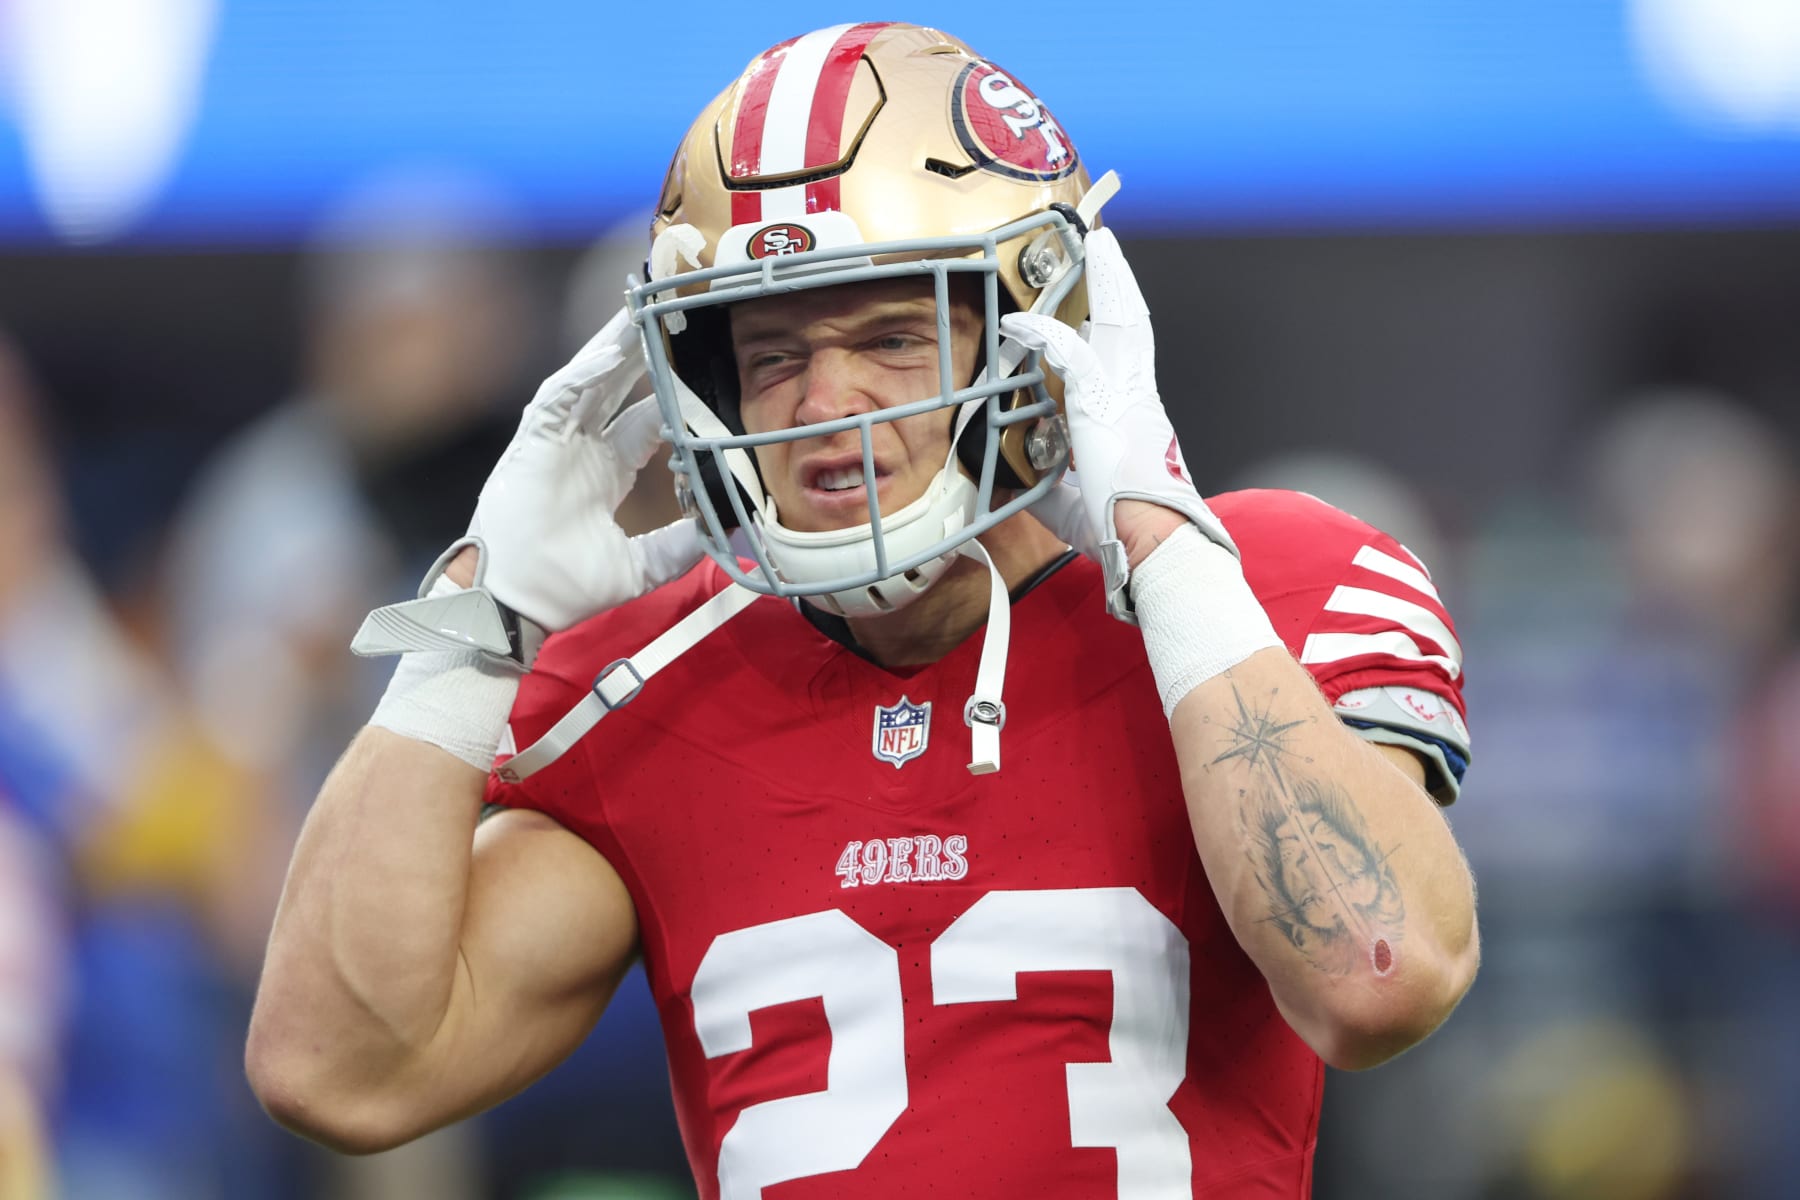 NFL Live In-Game Betting Tips & Strategy: 49ers vs. Giants – Week 3